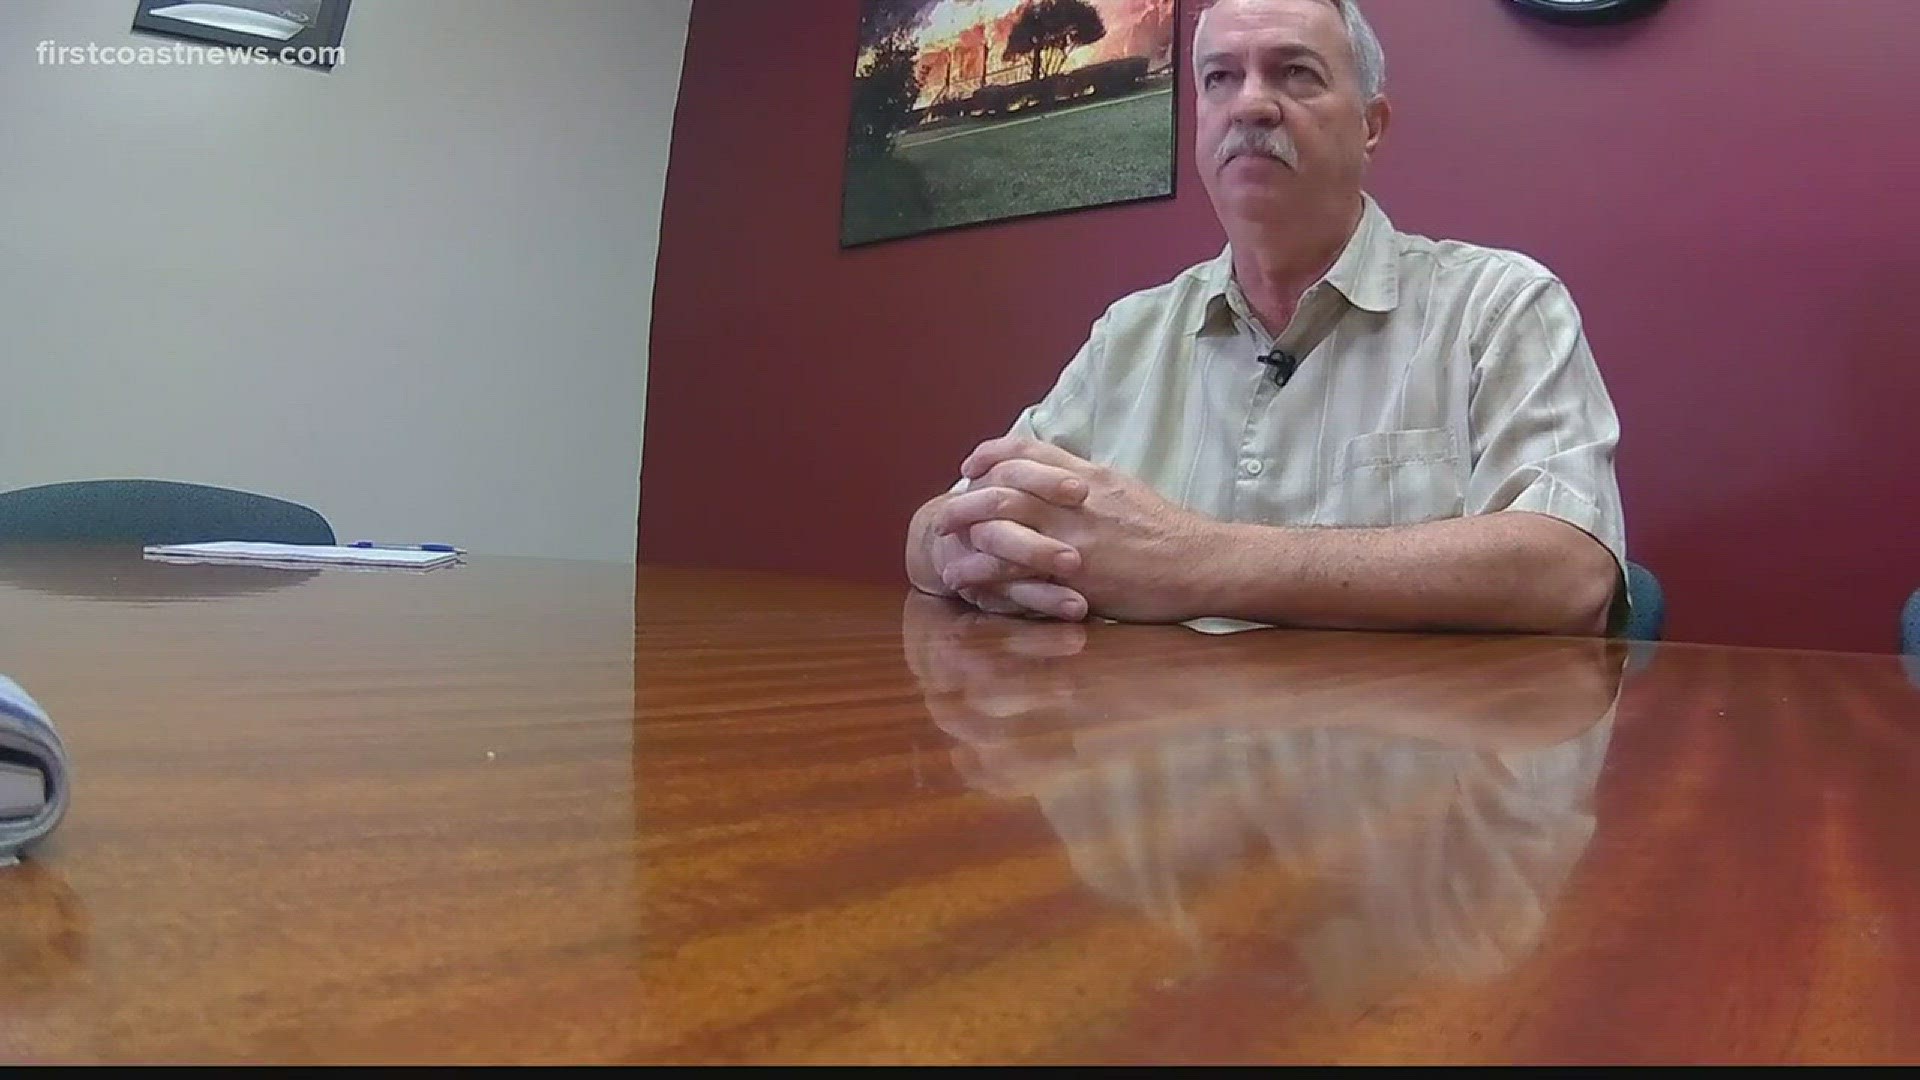 The Camden County fire chief speaks with First Coast News about the controversy surrounding his department and why he left his job.